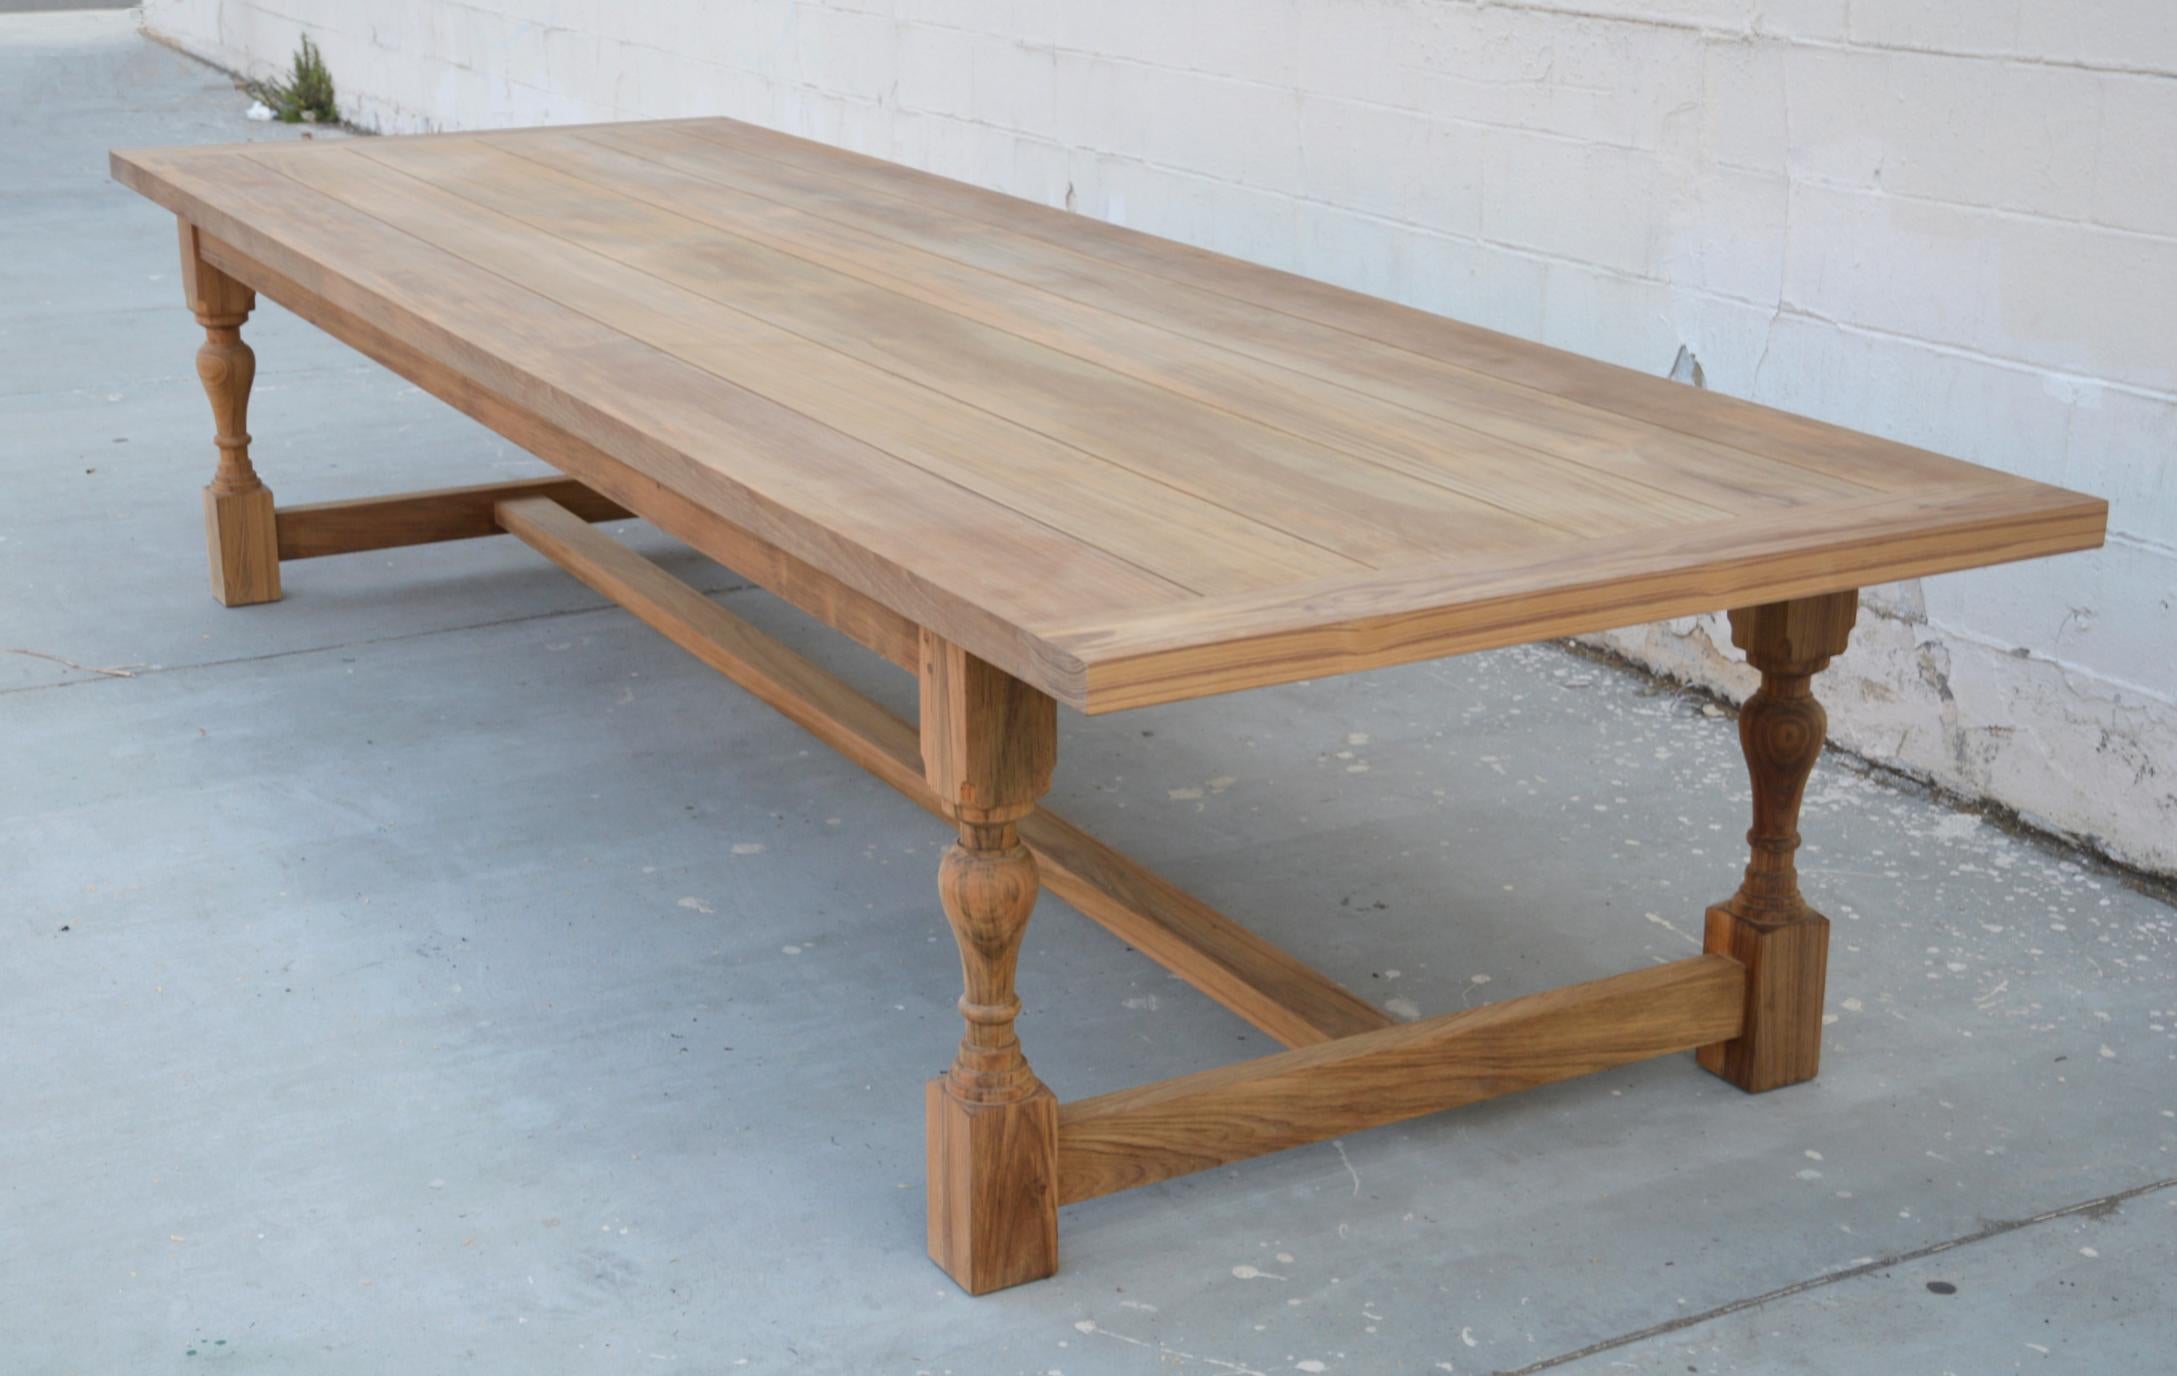 Designed to withstand any climate, this teak dining table can be used either indoors or outdoors. Seen here in 144